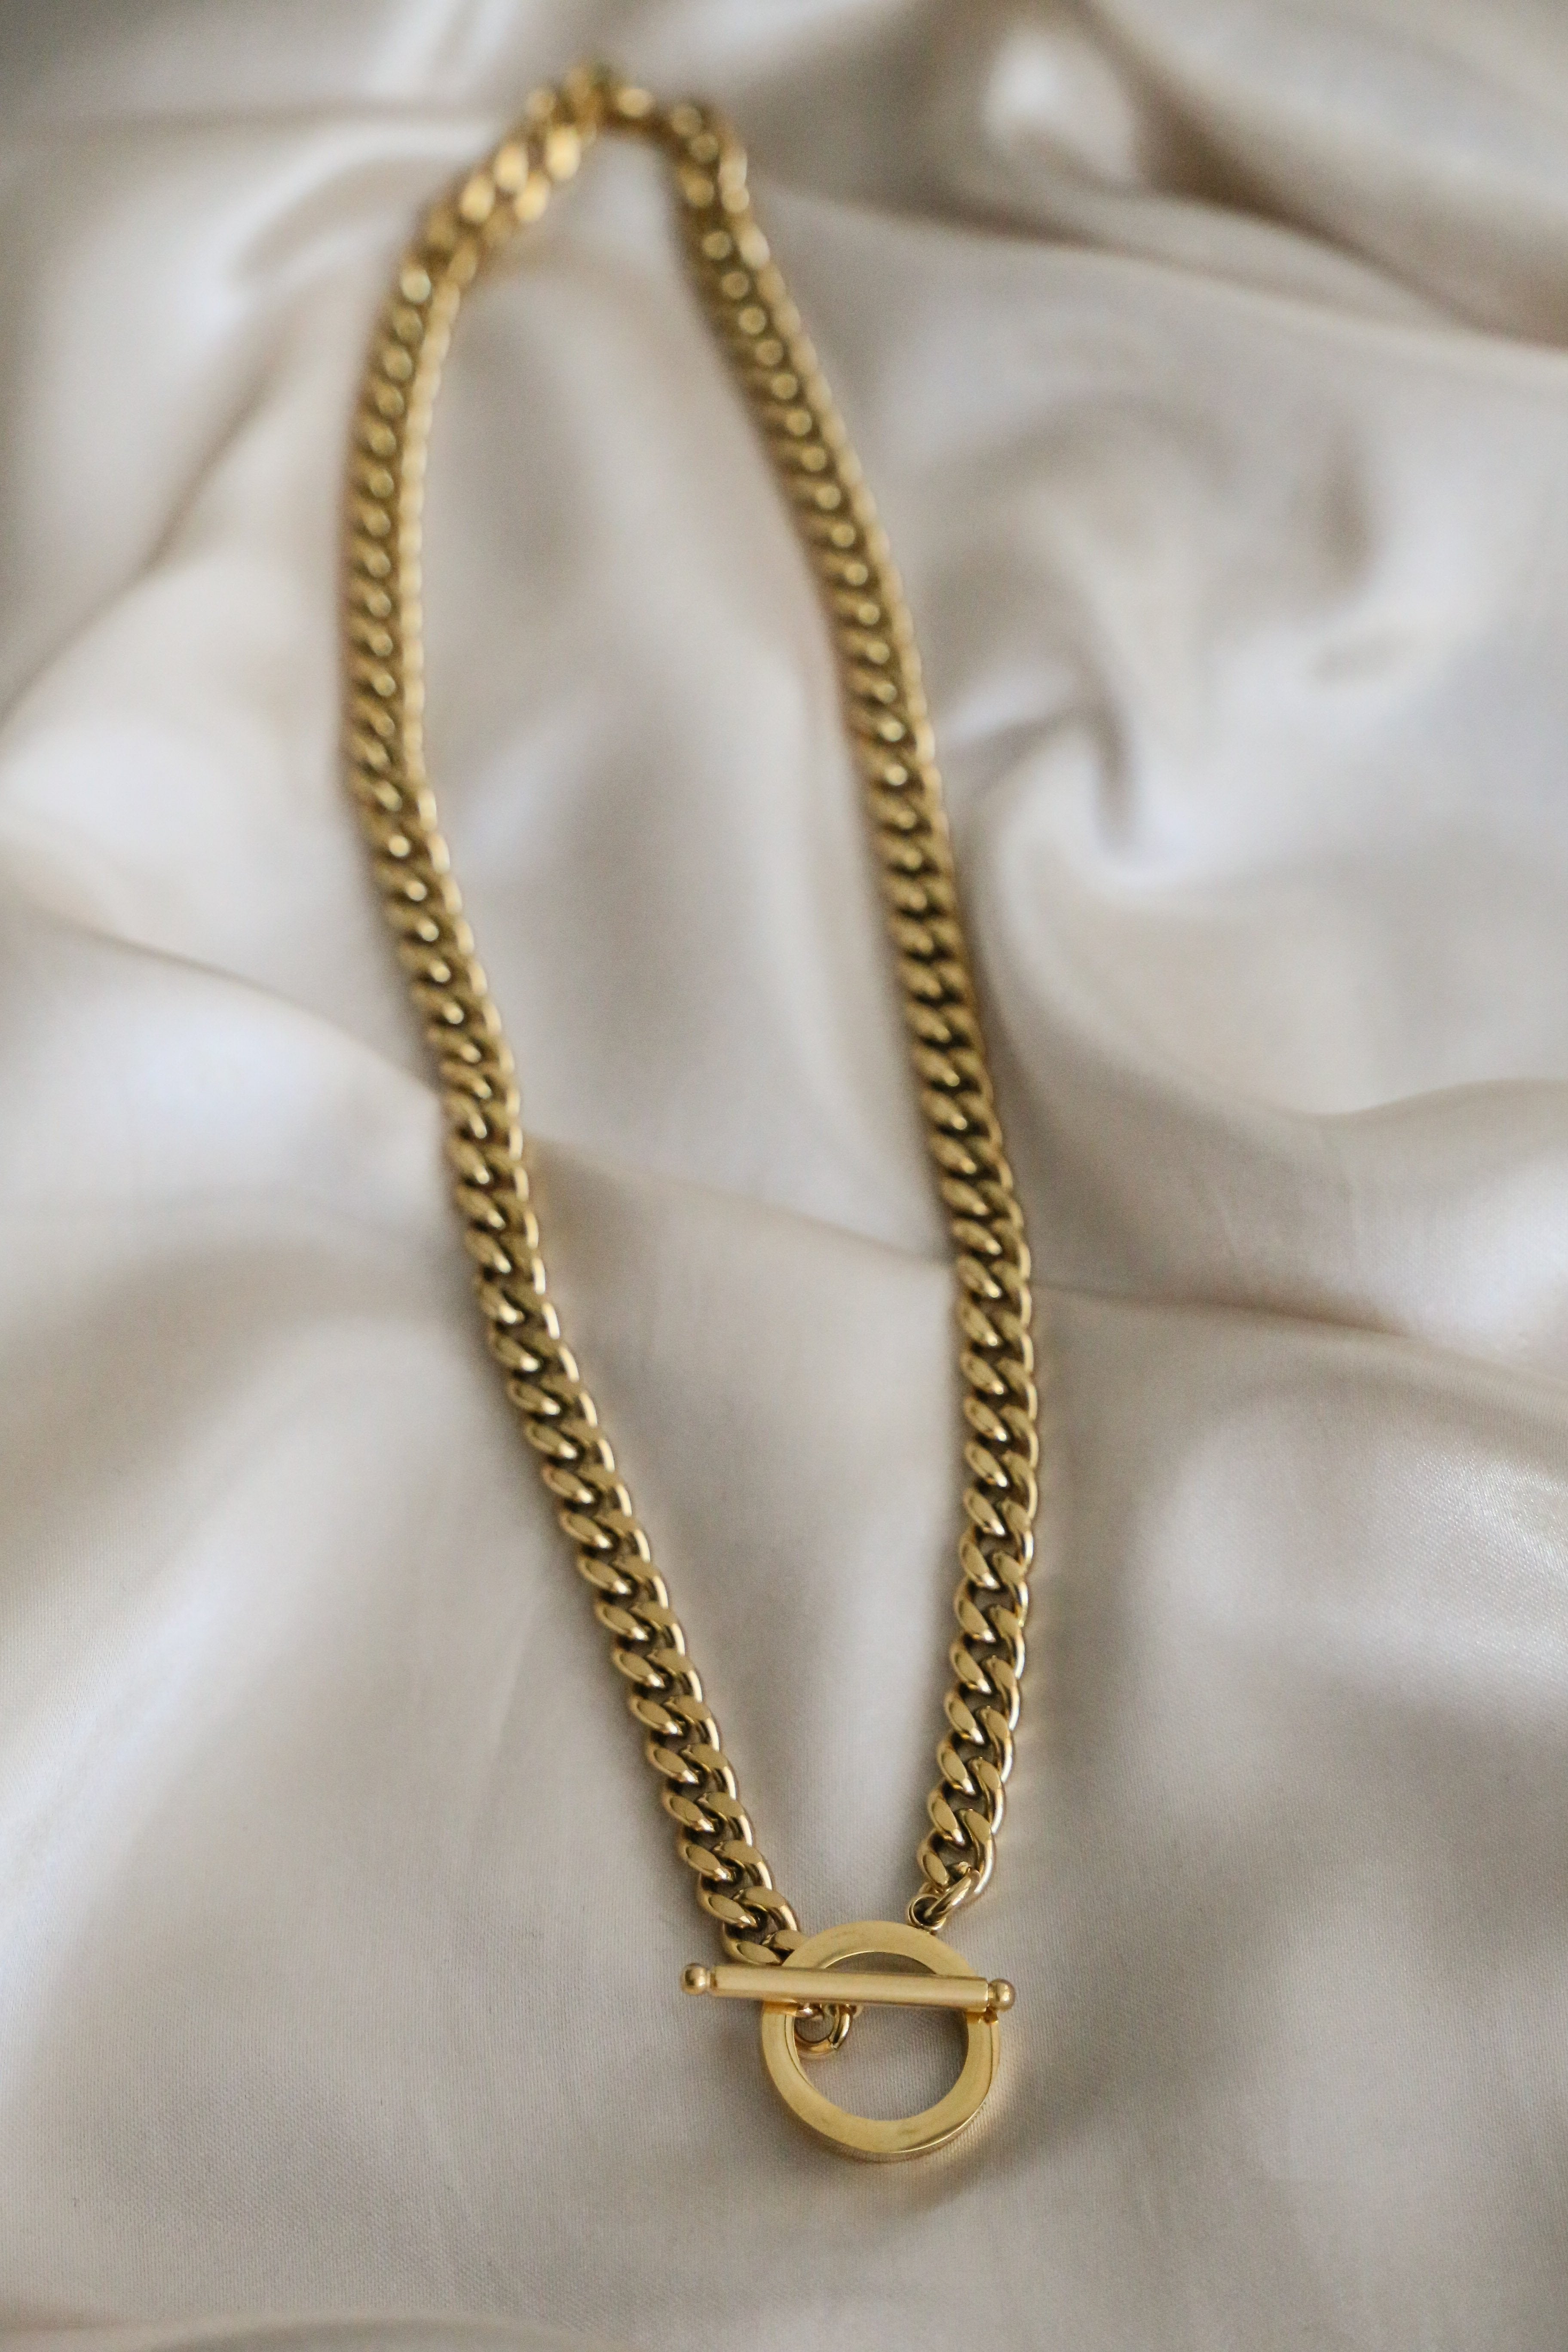 Essence Necklace - Boutique Minimaliste has waterproof, durable, elegant and vintage inspired jewelry